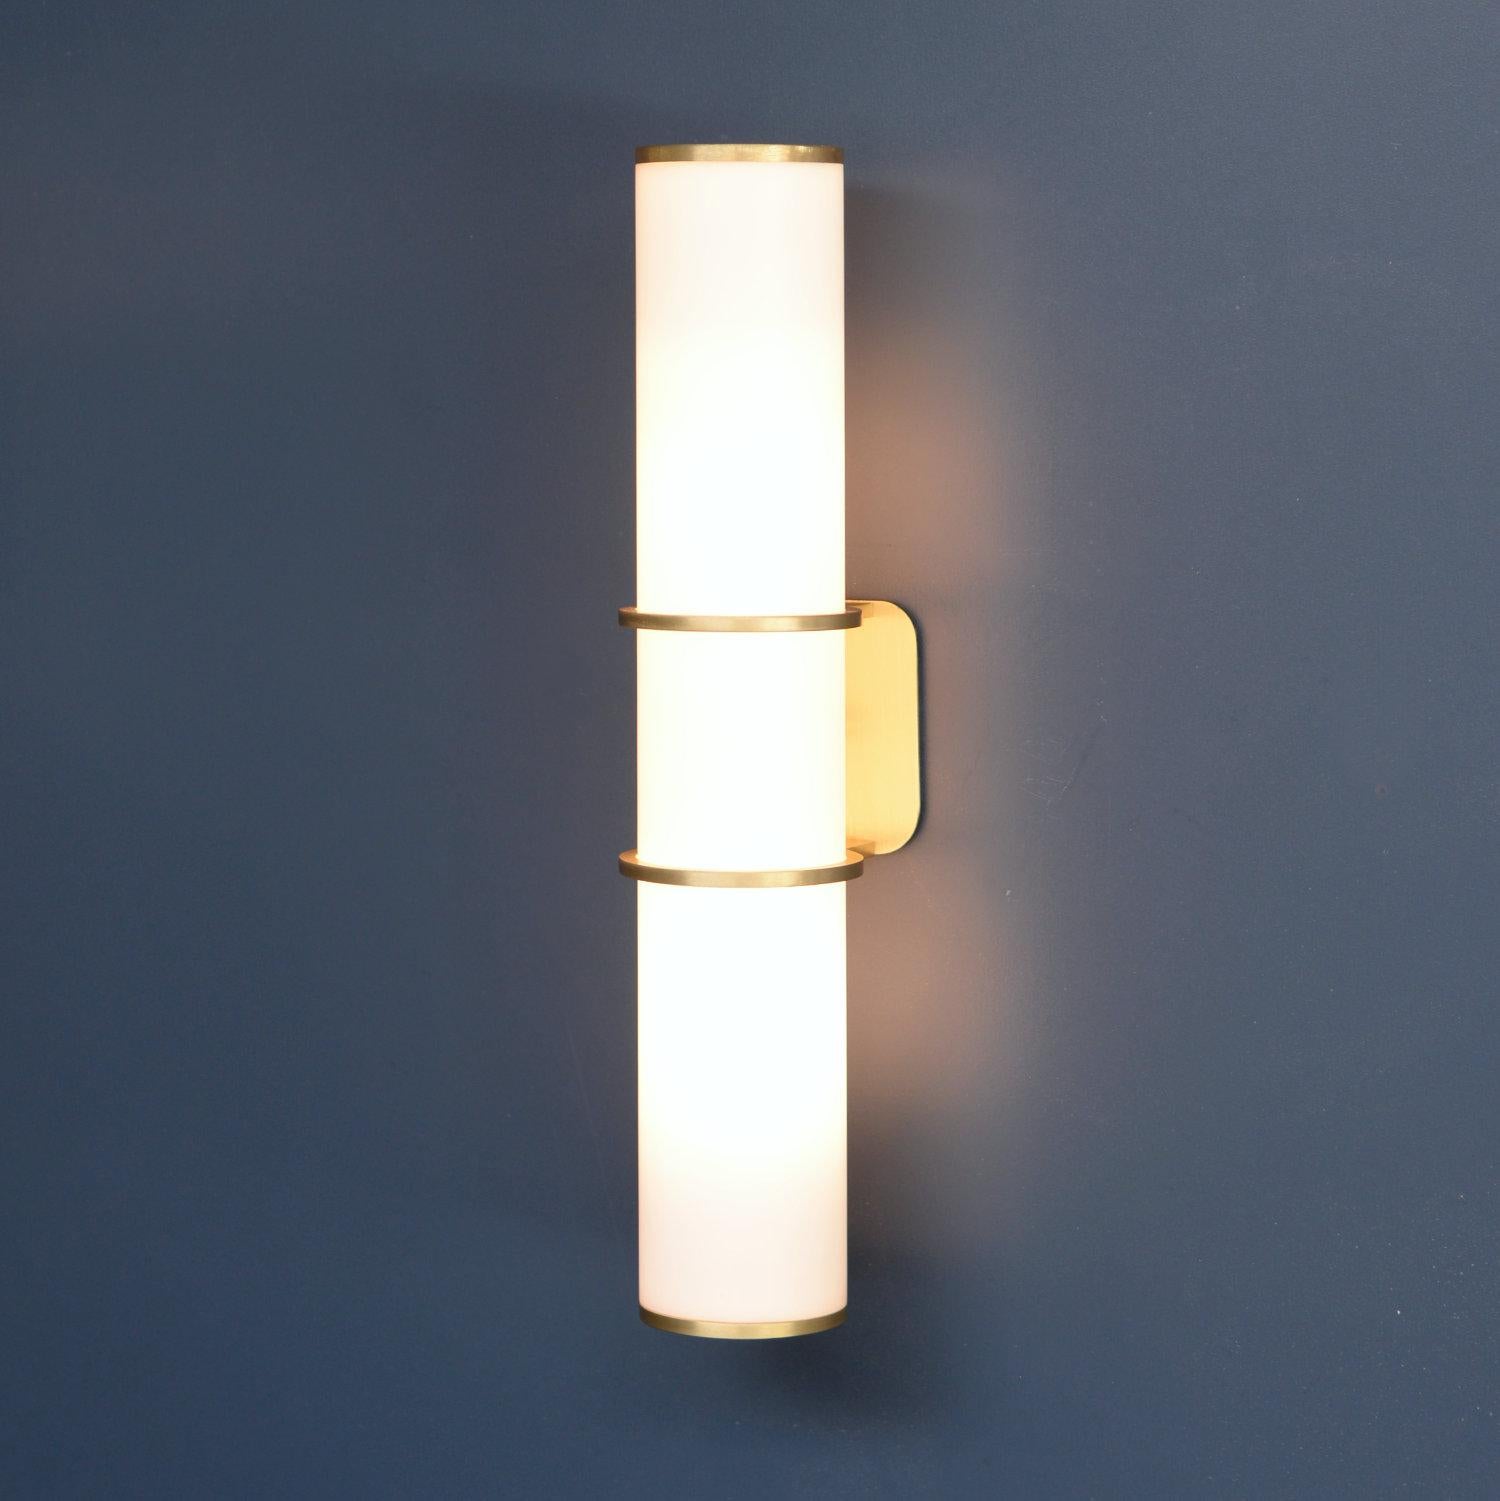 With its towering presence, the LUCERNA wall light is a true statement. The lightly aged & brushed brass collars & caps add a touch of luxury to the clean lines & minimal form.

Equally at home in hallways, living rooms & bedsides and also ideal